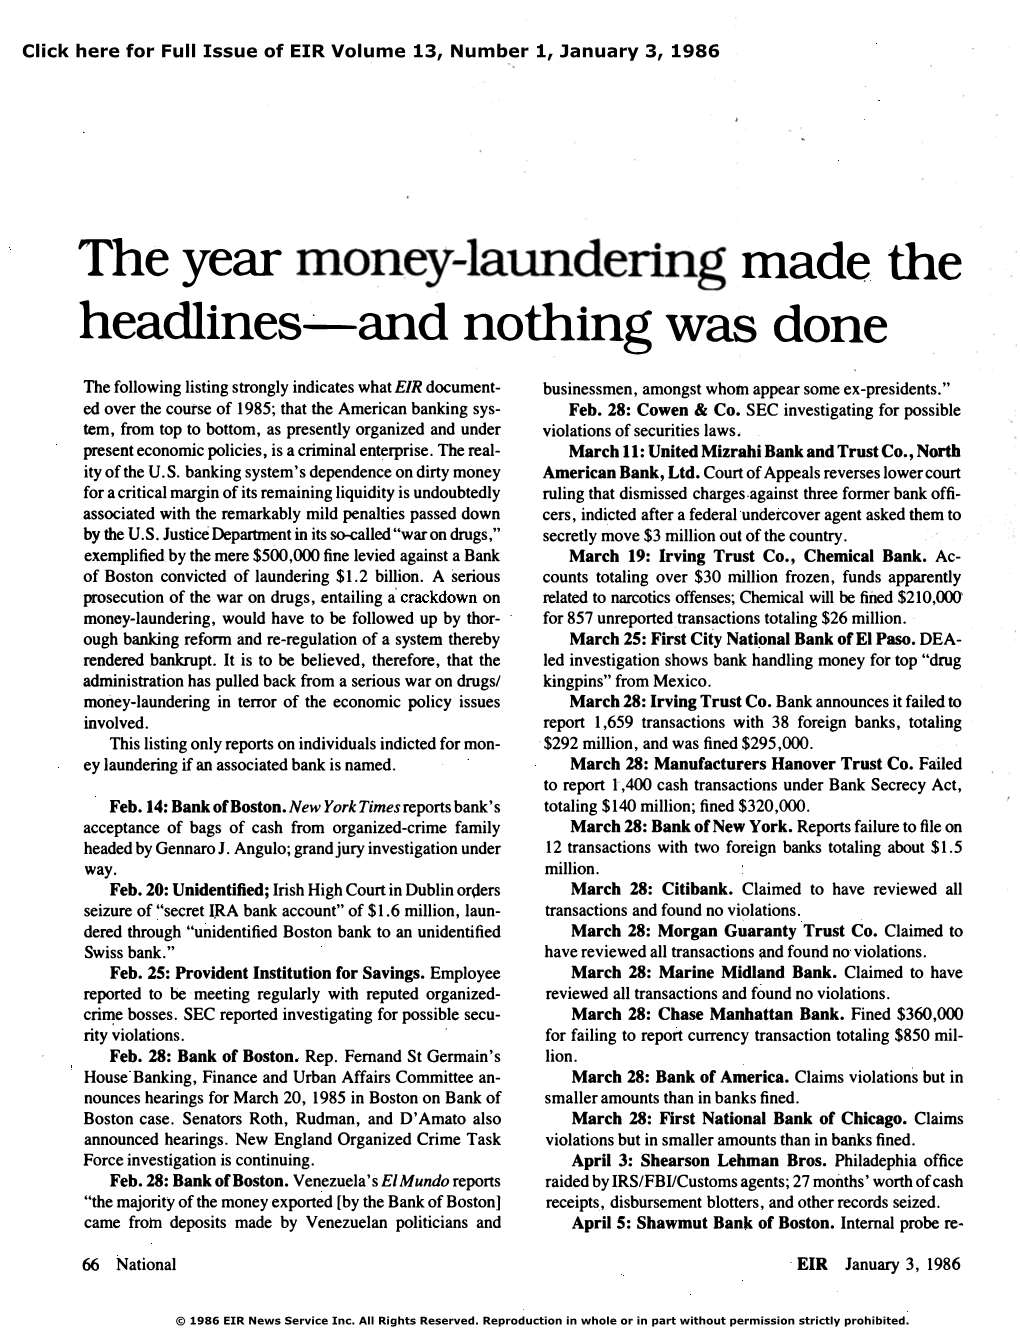 The Year Money-Laundering Made the Headlines—And Nothing Was